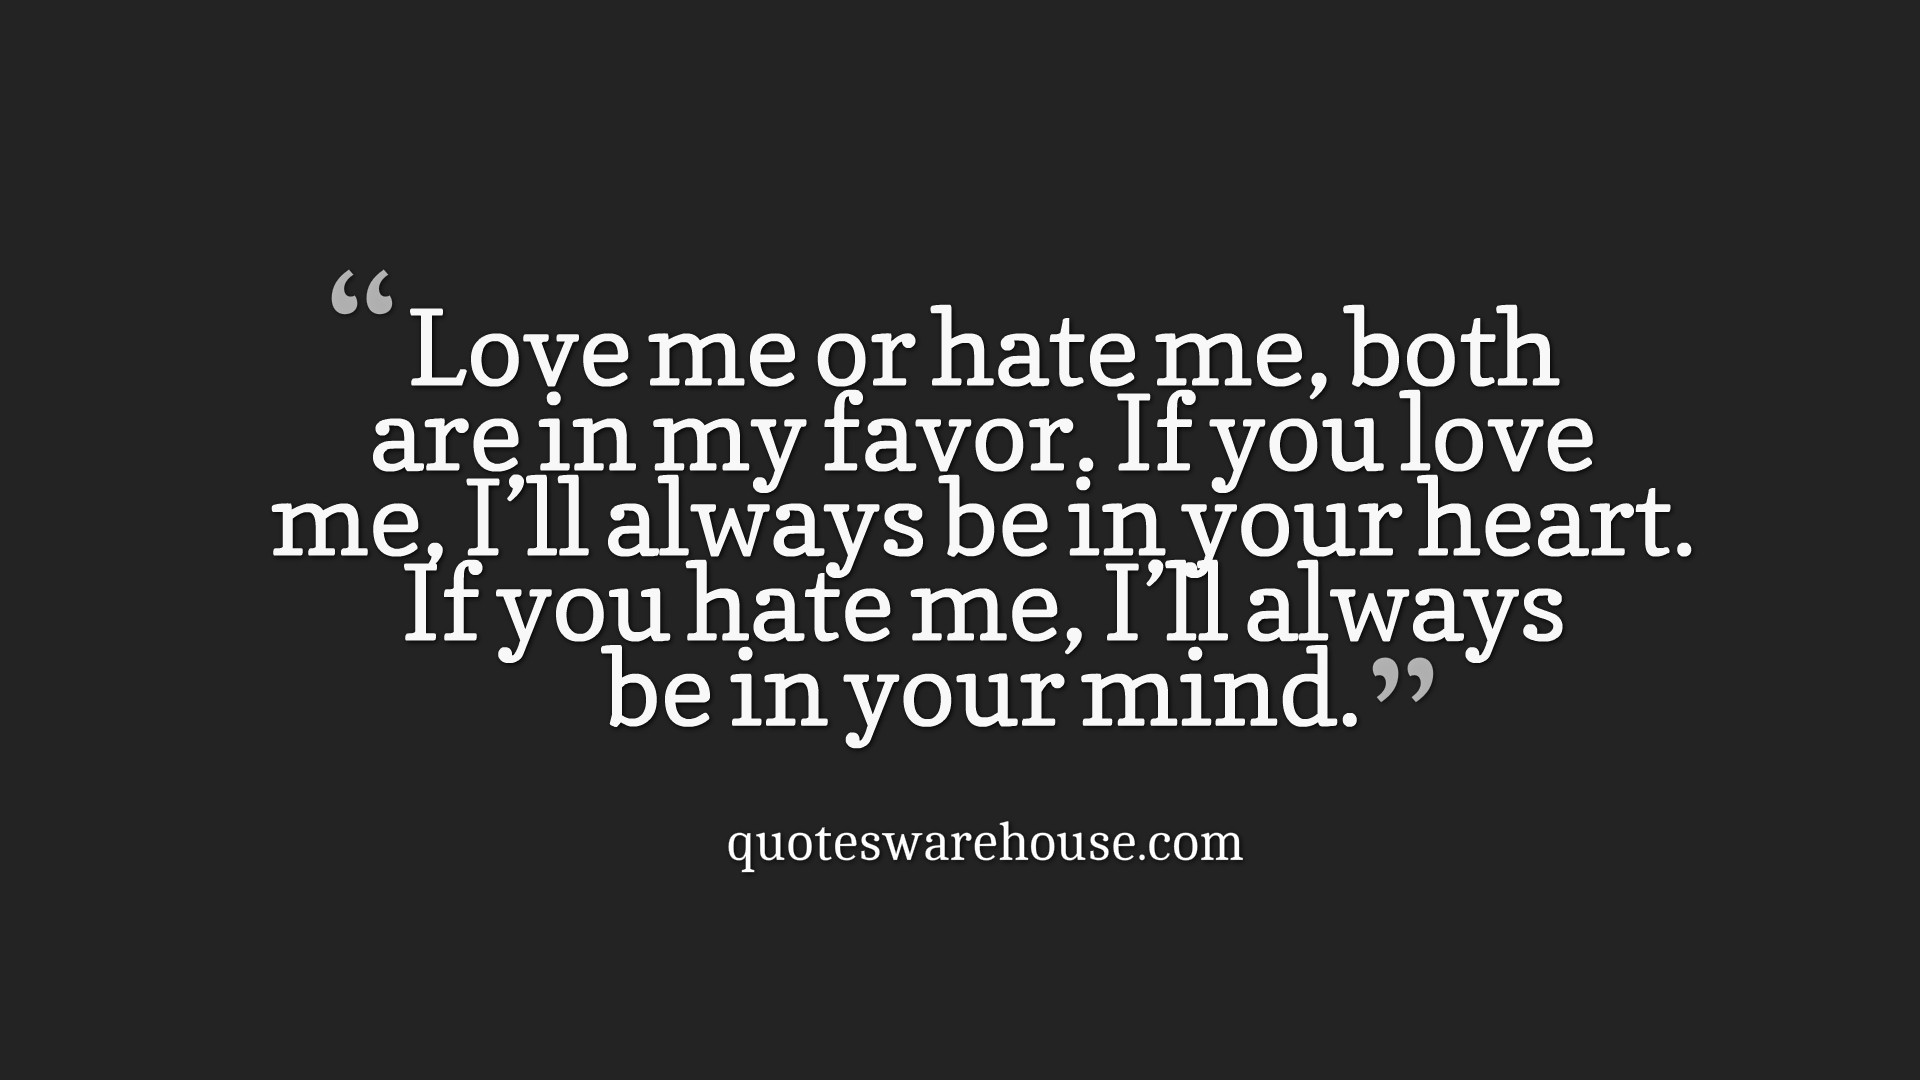 Quotes About Love And Hate
 Quotes about Love Me Hate Me 50 quotes